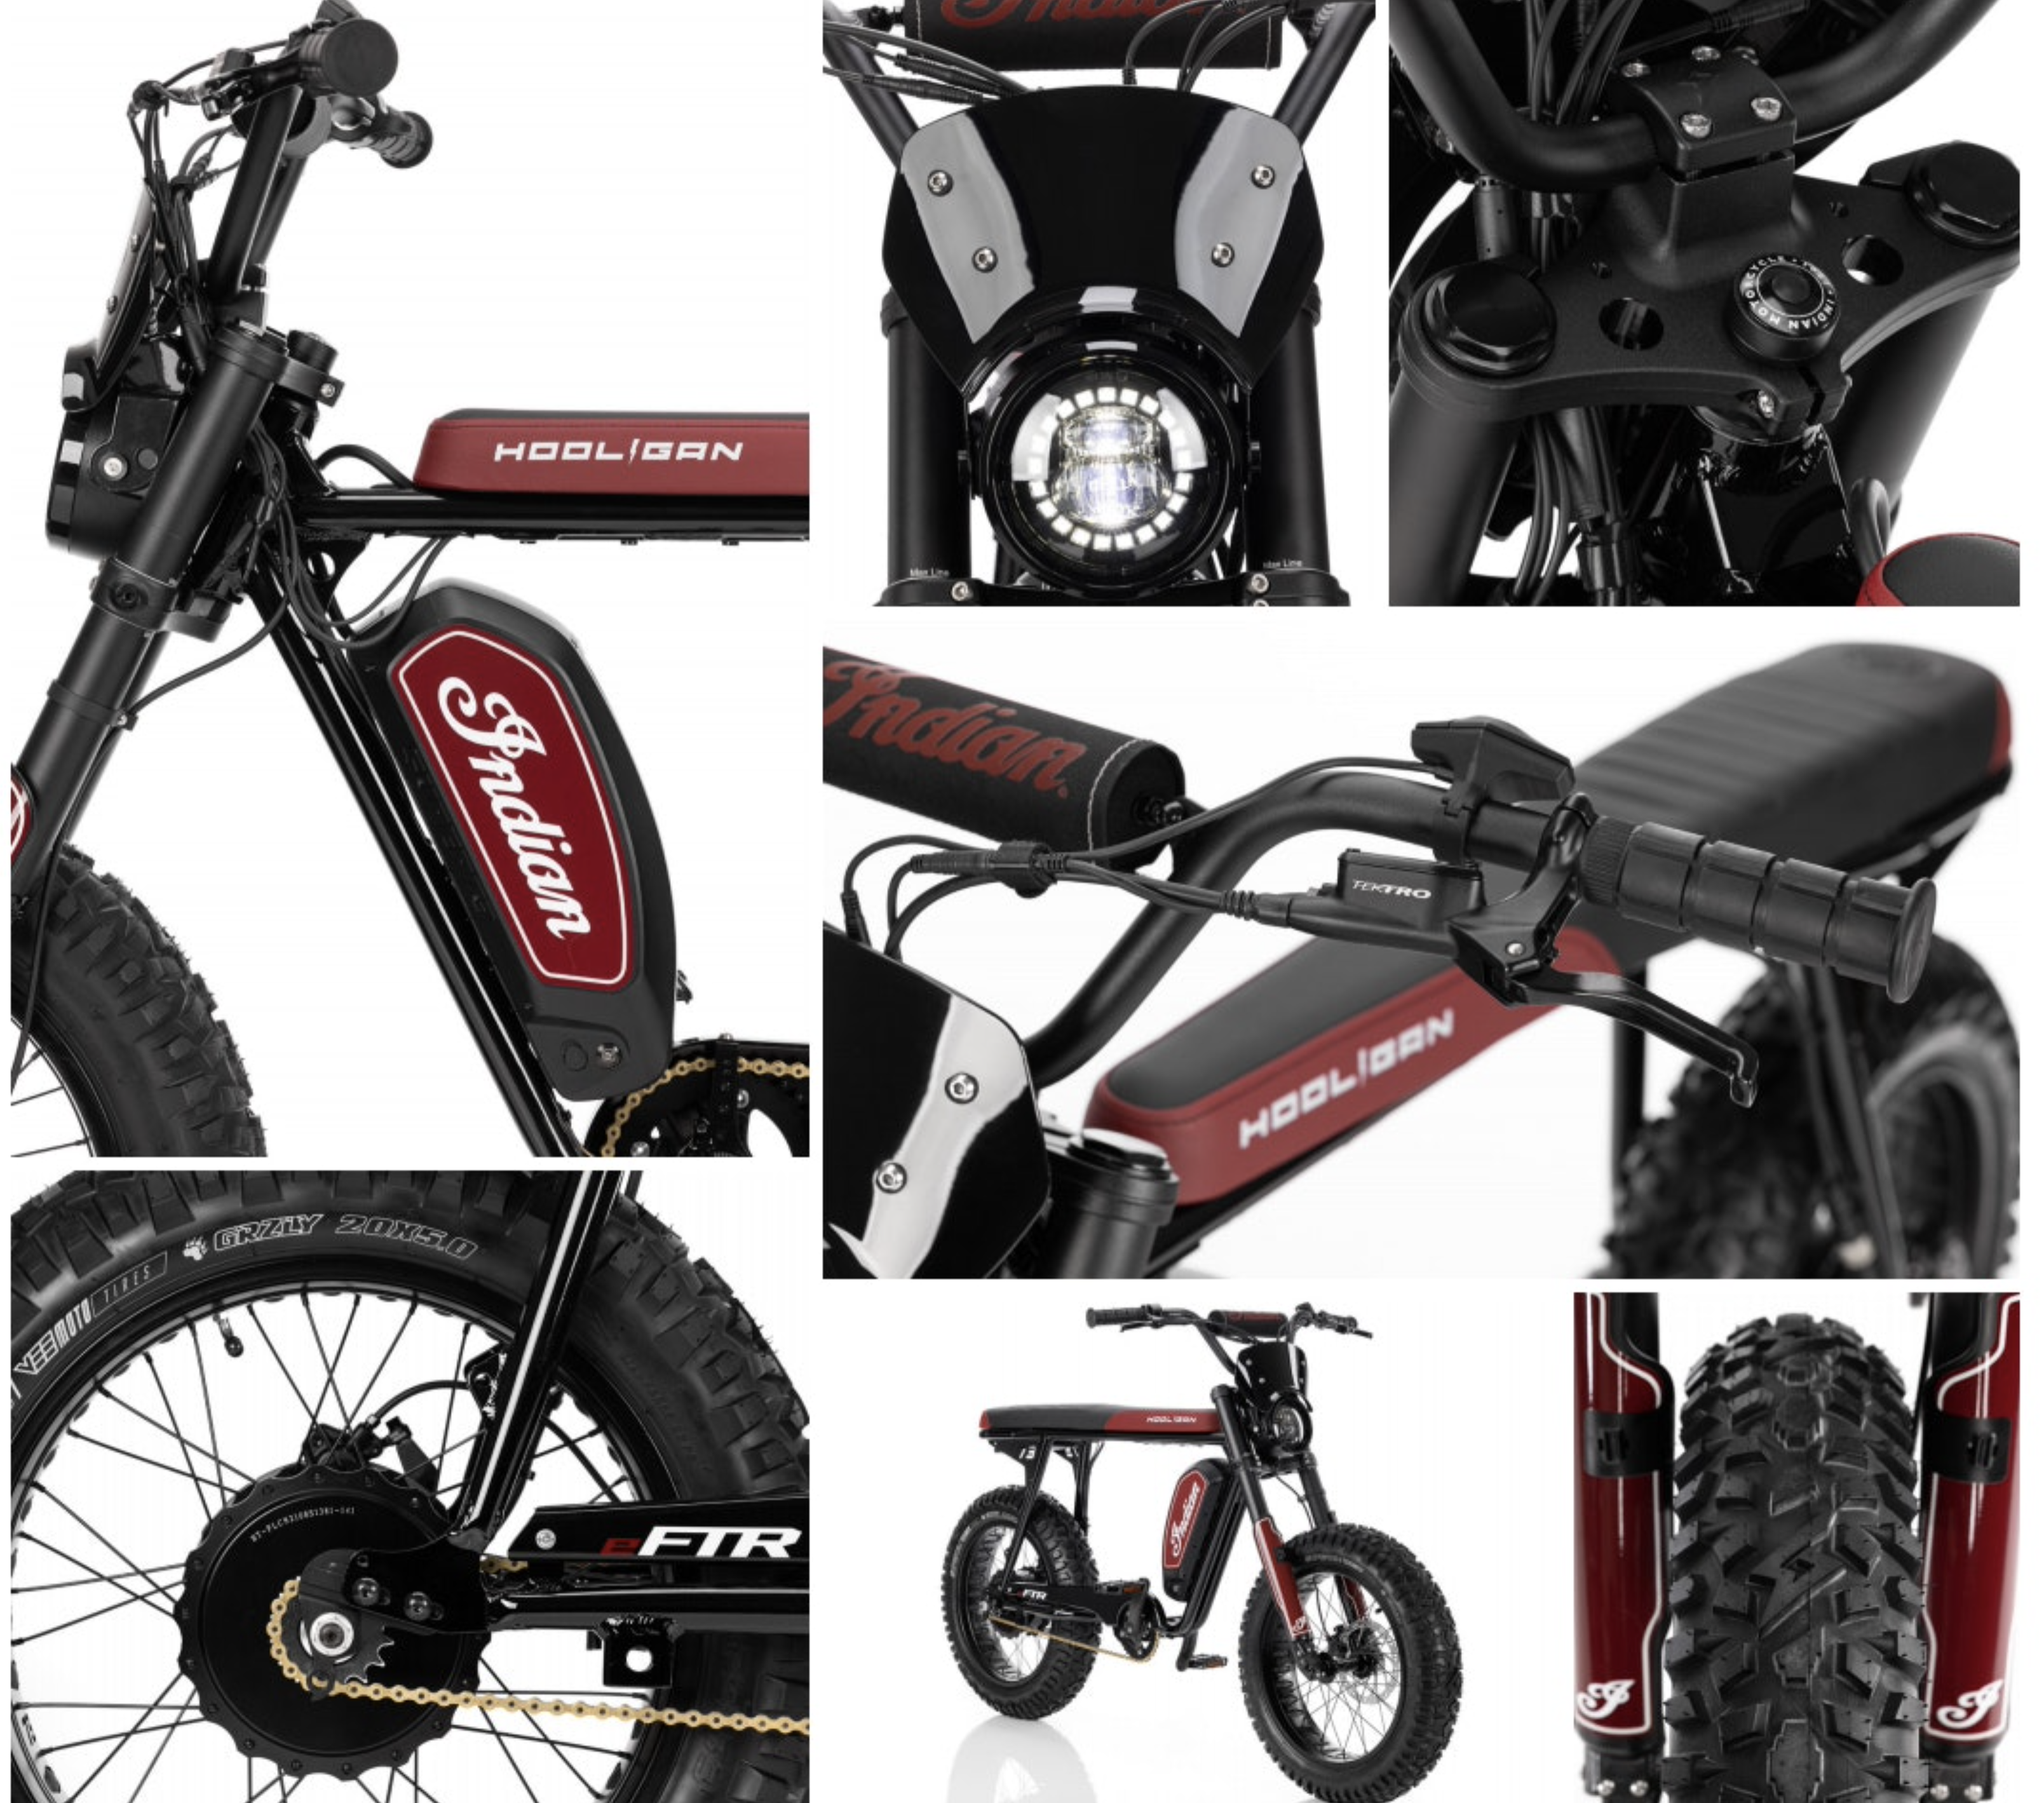 A view of the eFTR® Hooligan 1.2, created by Indian Motorcycles, together with the knowledge and know-how of California-based ebike brand SUPER73